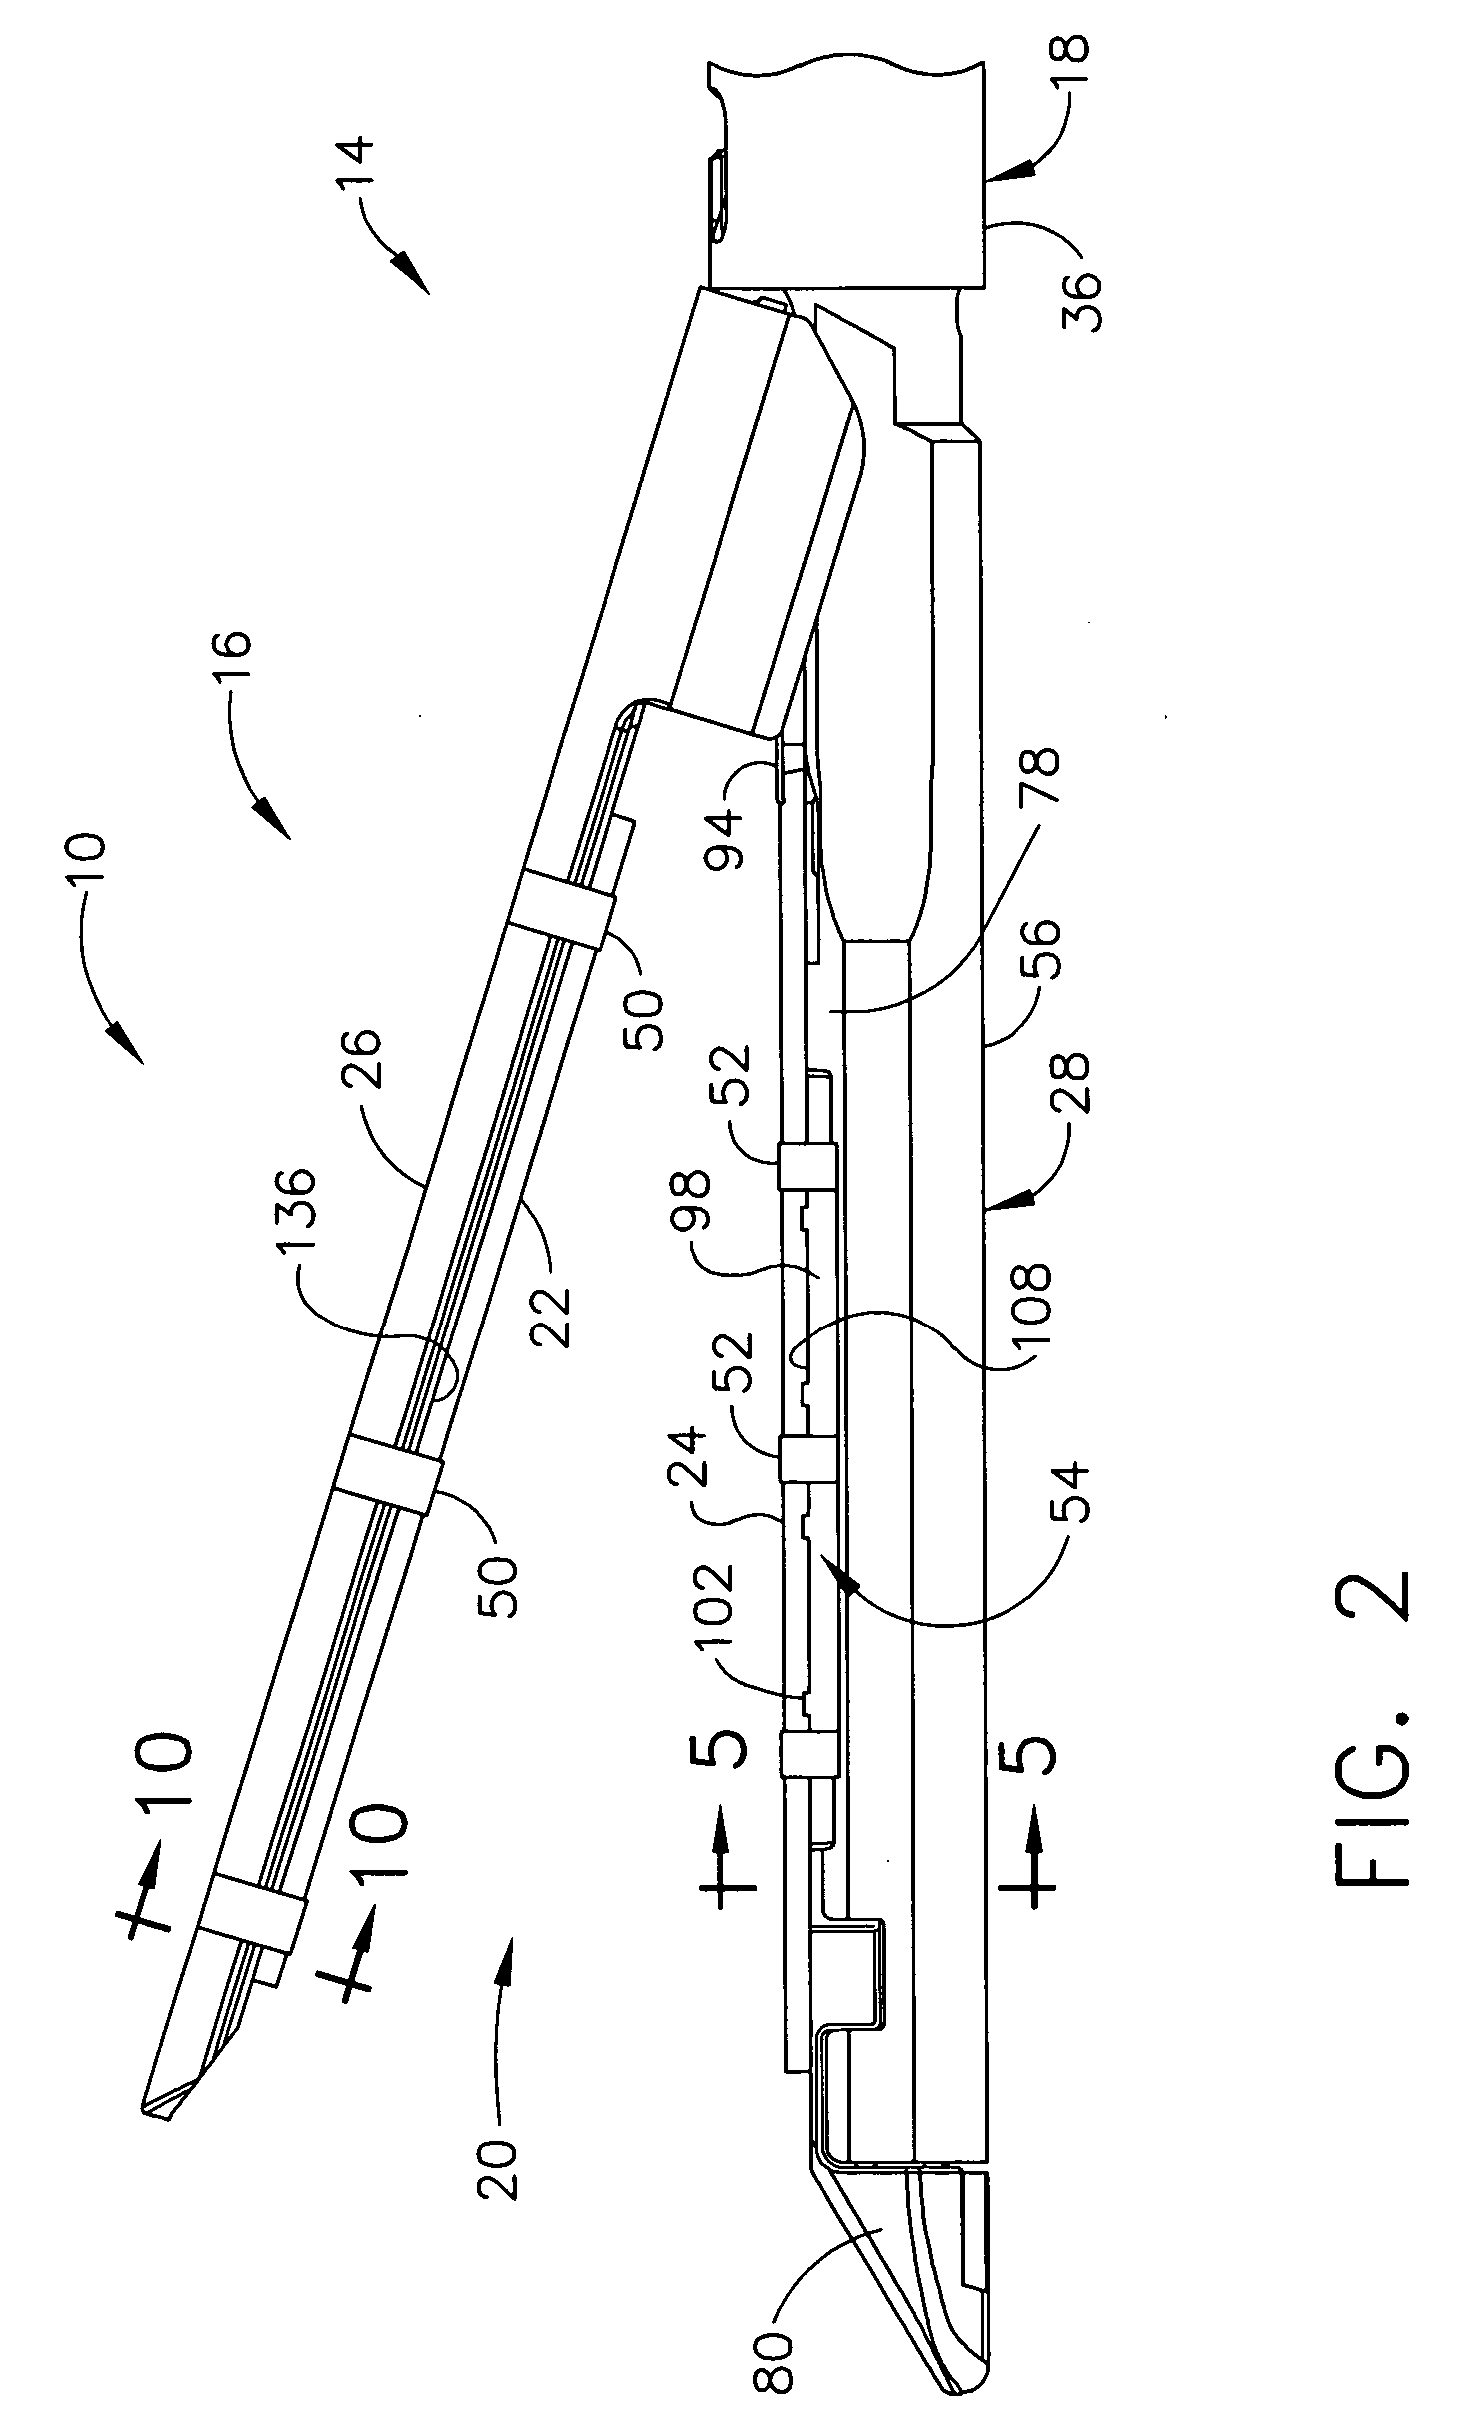 Surgical stapling instrument having an electroactive polymer actuated buttress deployment mechanism